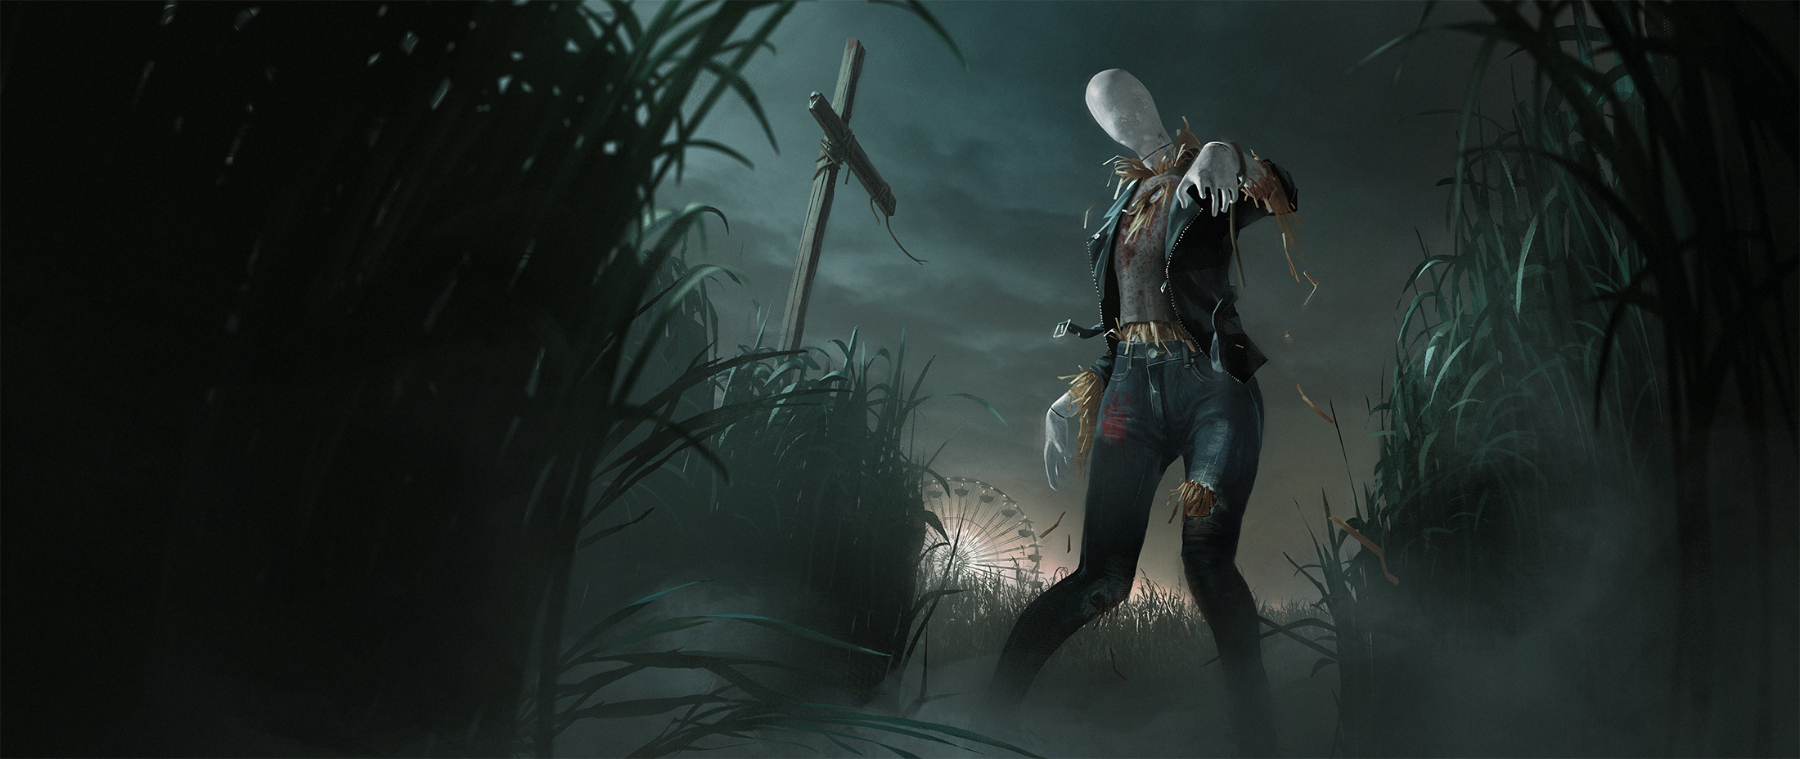 illustration of a scarecrow hunting a victim